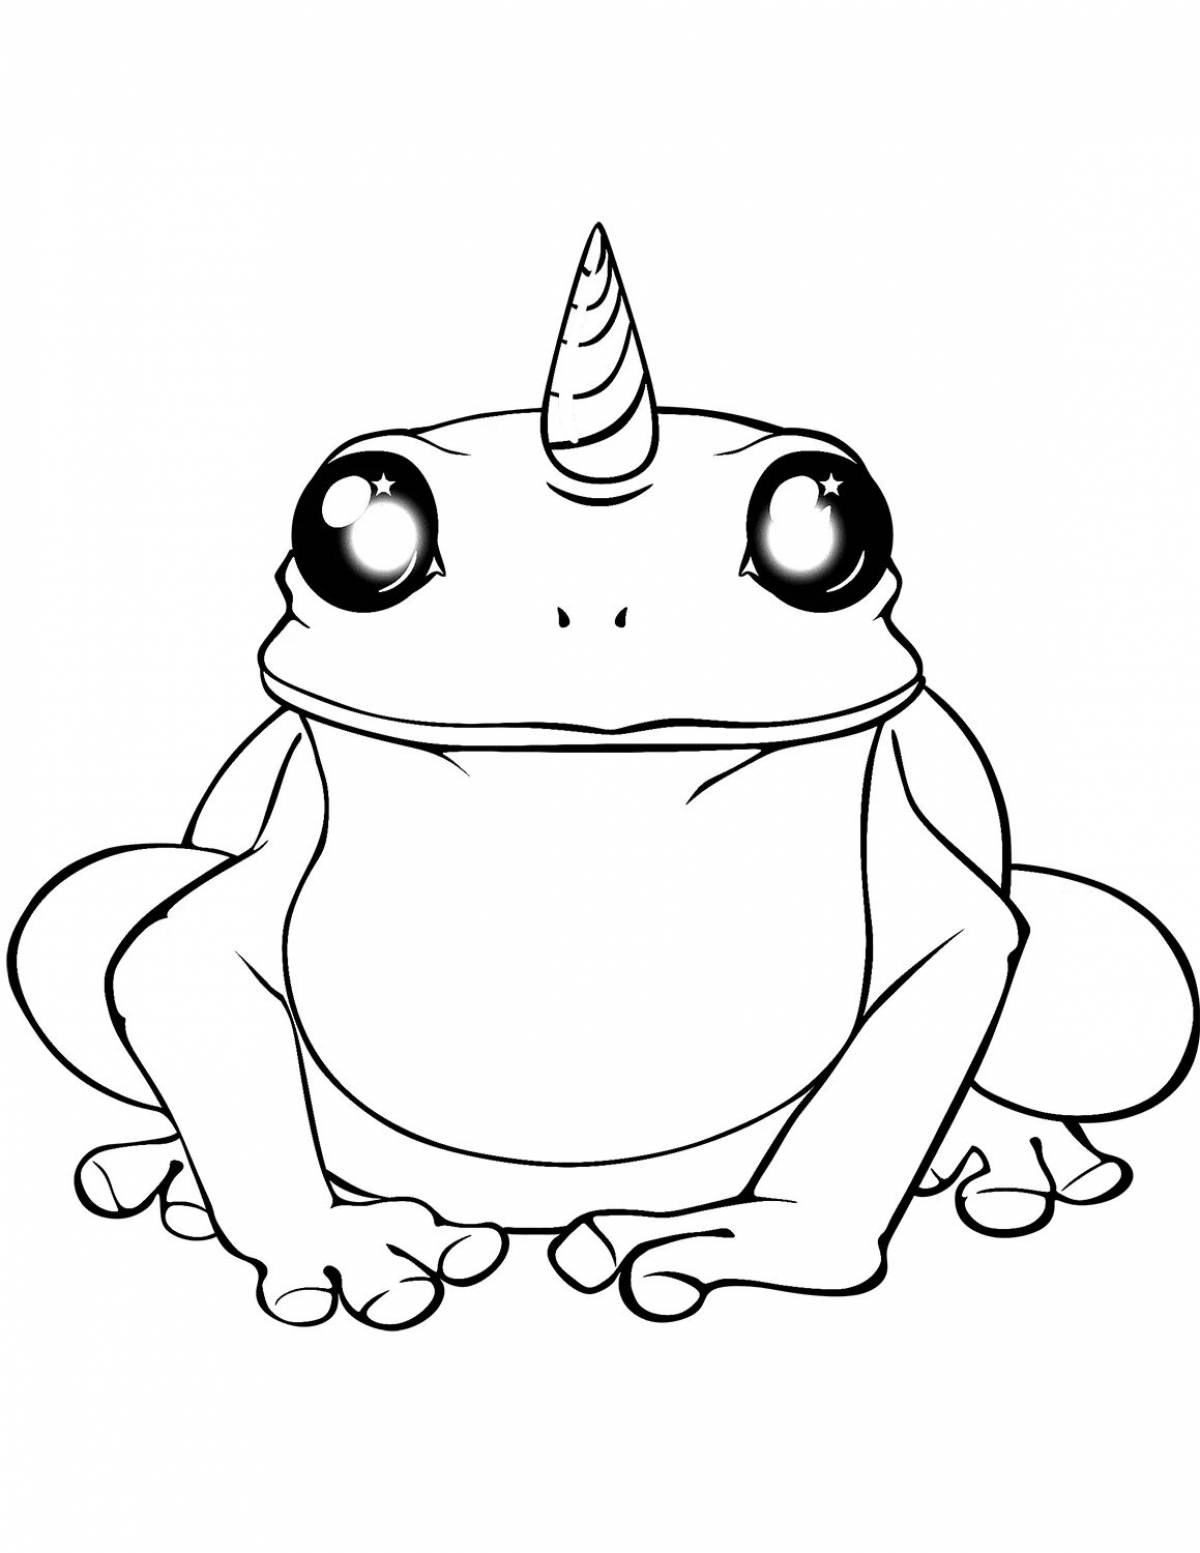 Cute frog from pinterest #2